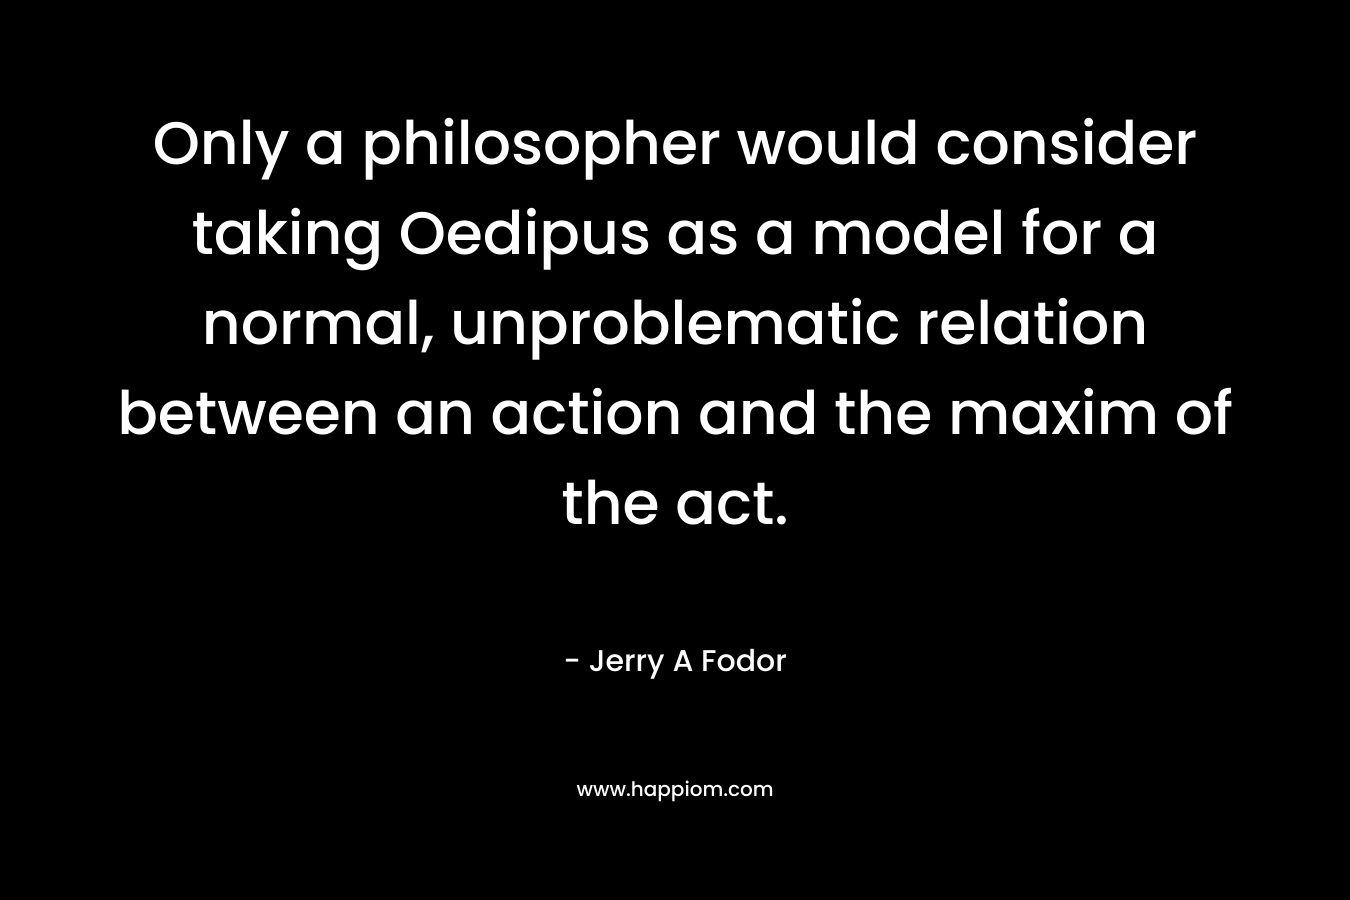 Only a philosopher would consider taking Oedipus as a model for a normal, unproblematic relation between an action and the maxim of the act. – Jerry A Fodor